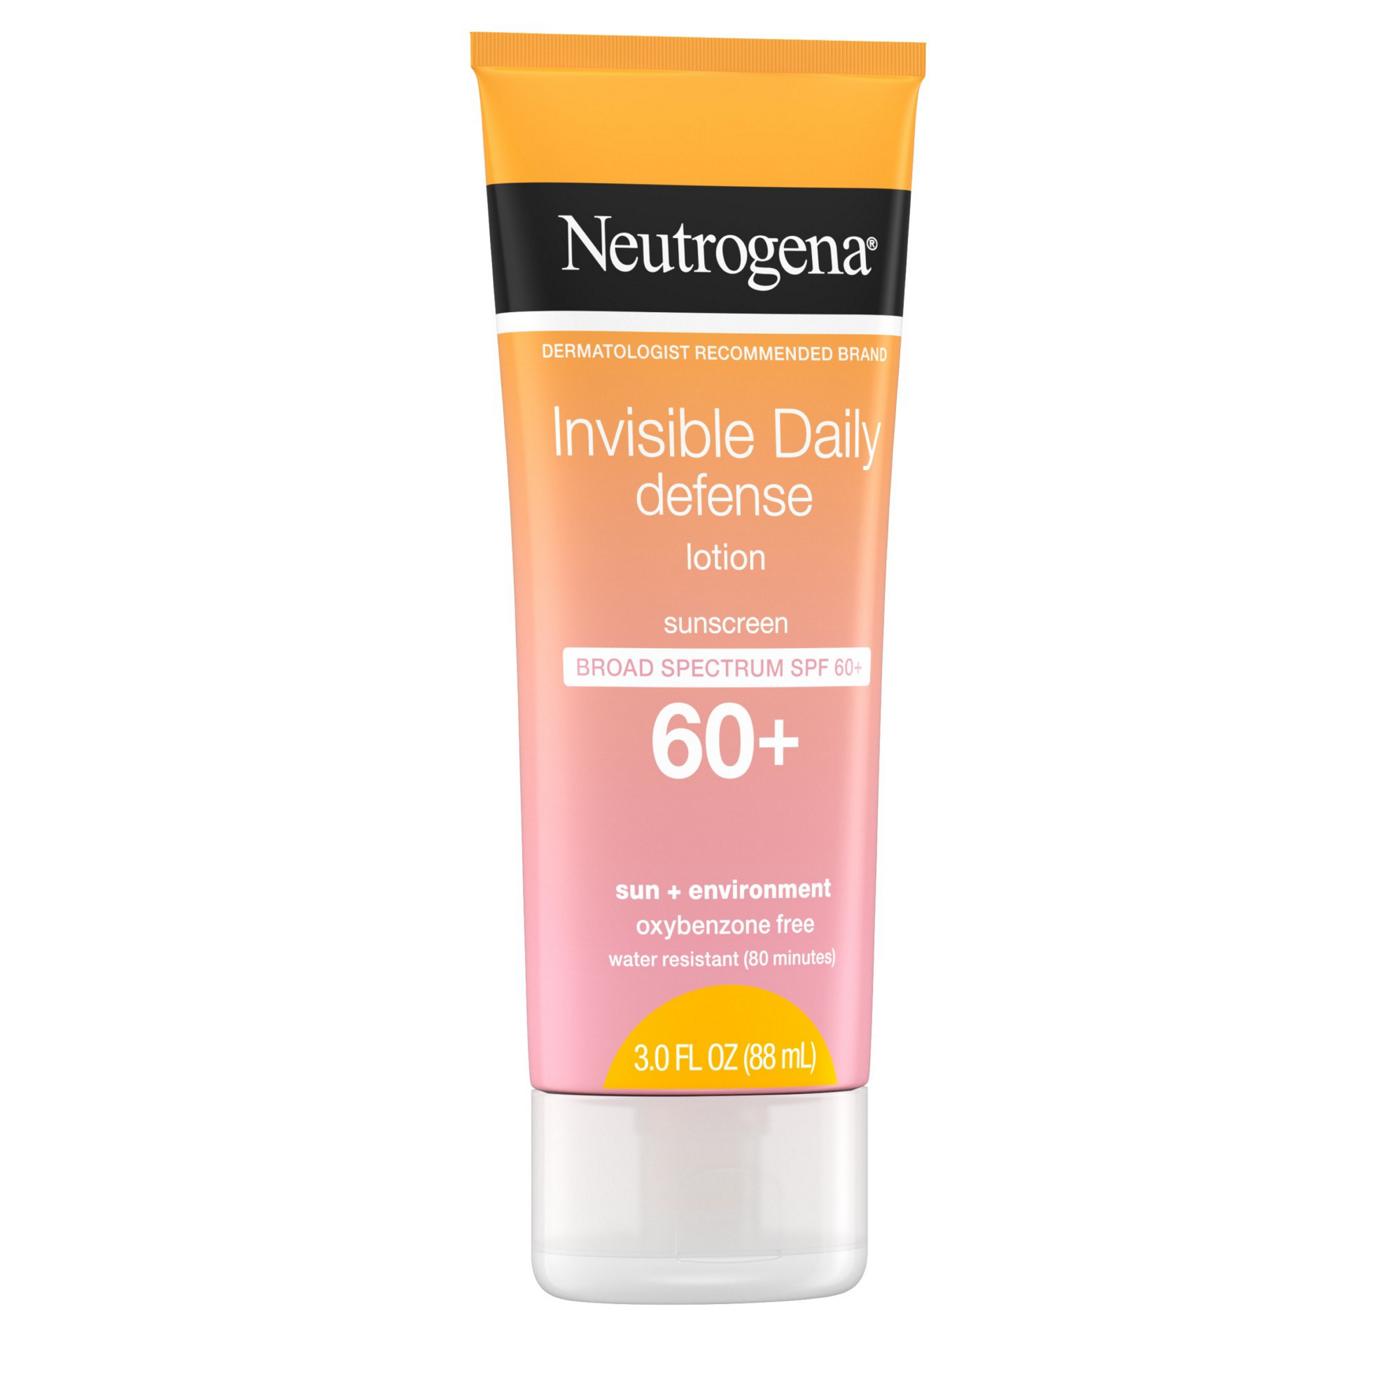 Neutrogena Invisible Daily Defense Sunscreen Lotion - SPF 60+; image 2 of 2